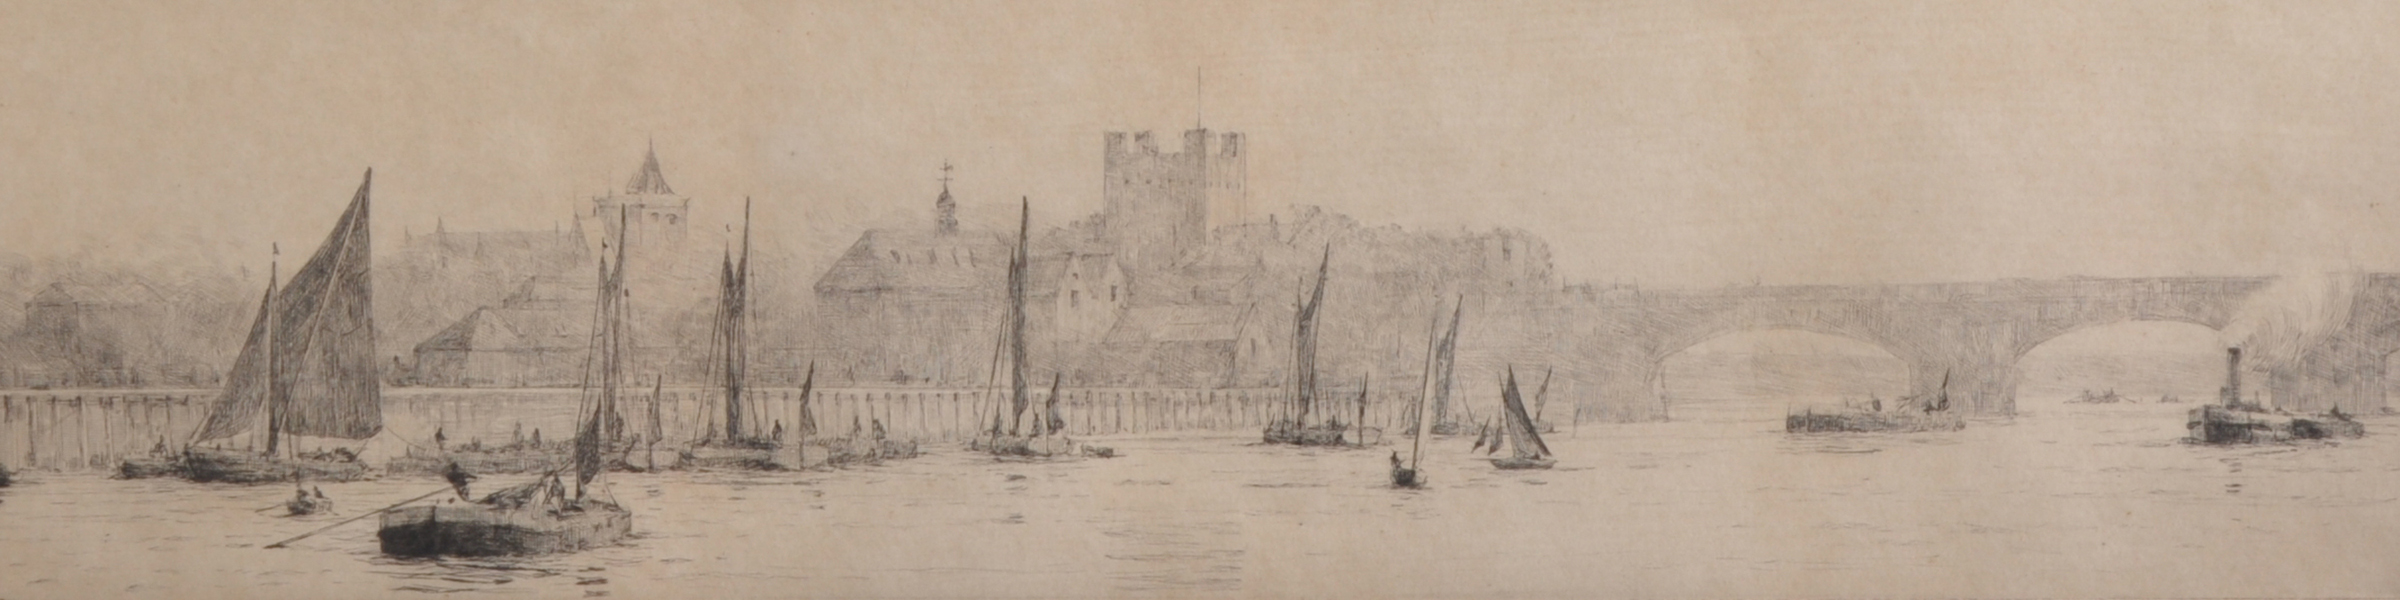 Rowland Langmaid (1897-1956) British. "Rochester", Etching, Signed and Inscribed in Pencil, 3.25"